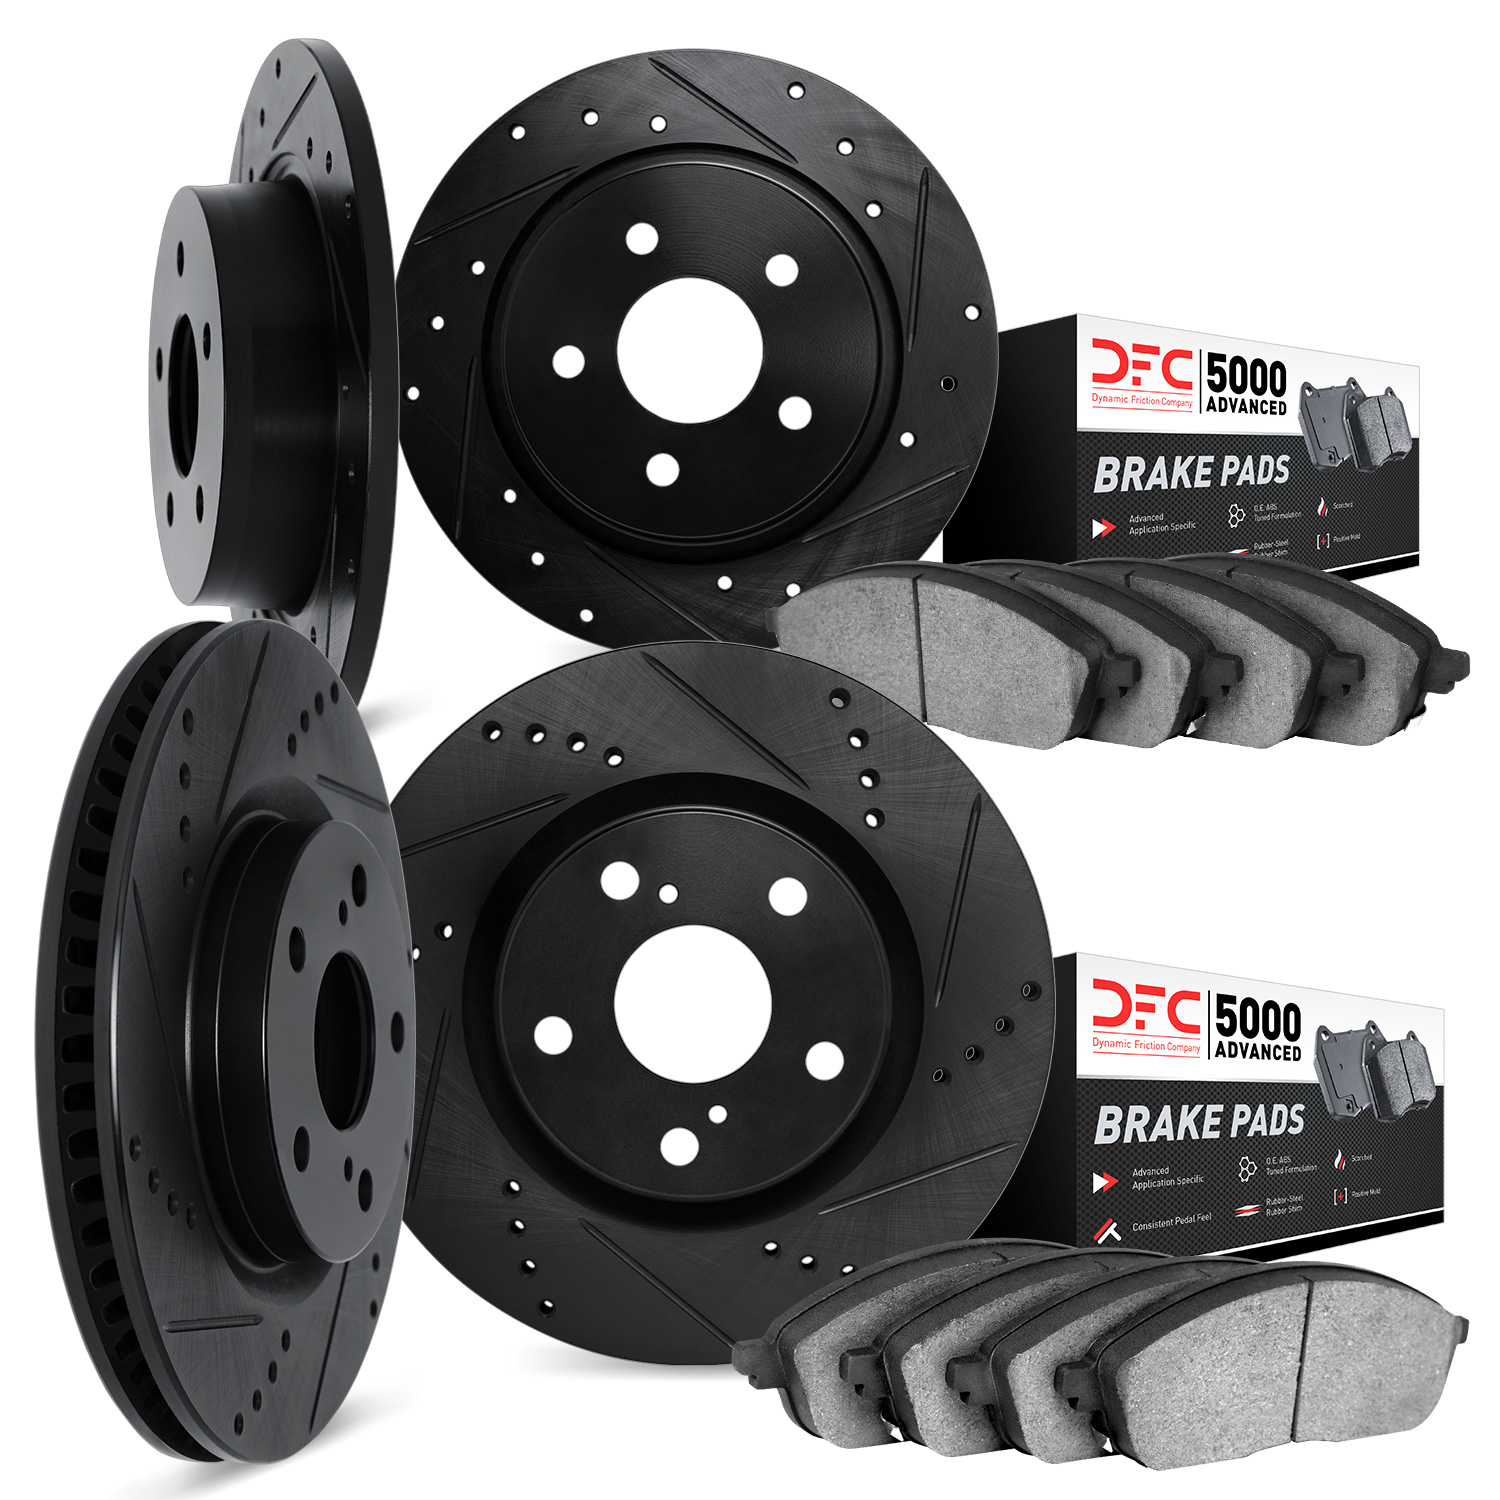 8504-45012 Drilled/Slotted Brake Rotors w/5000 Advanced Brake Pads Kit [Black], 1986-1992 GM, Position: Front and Rear